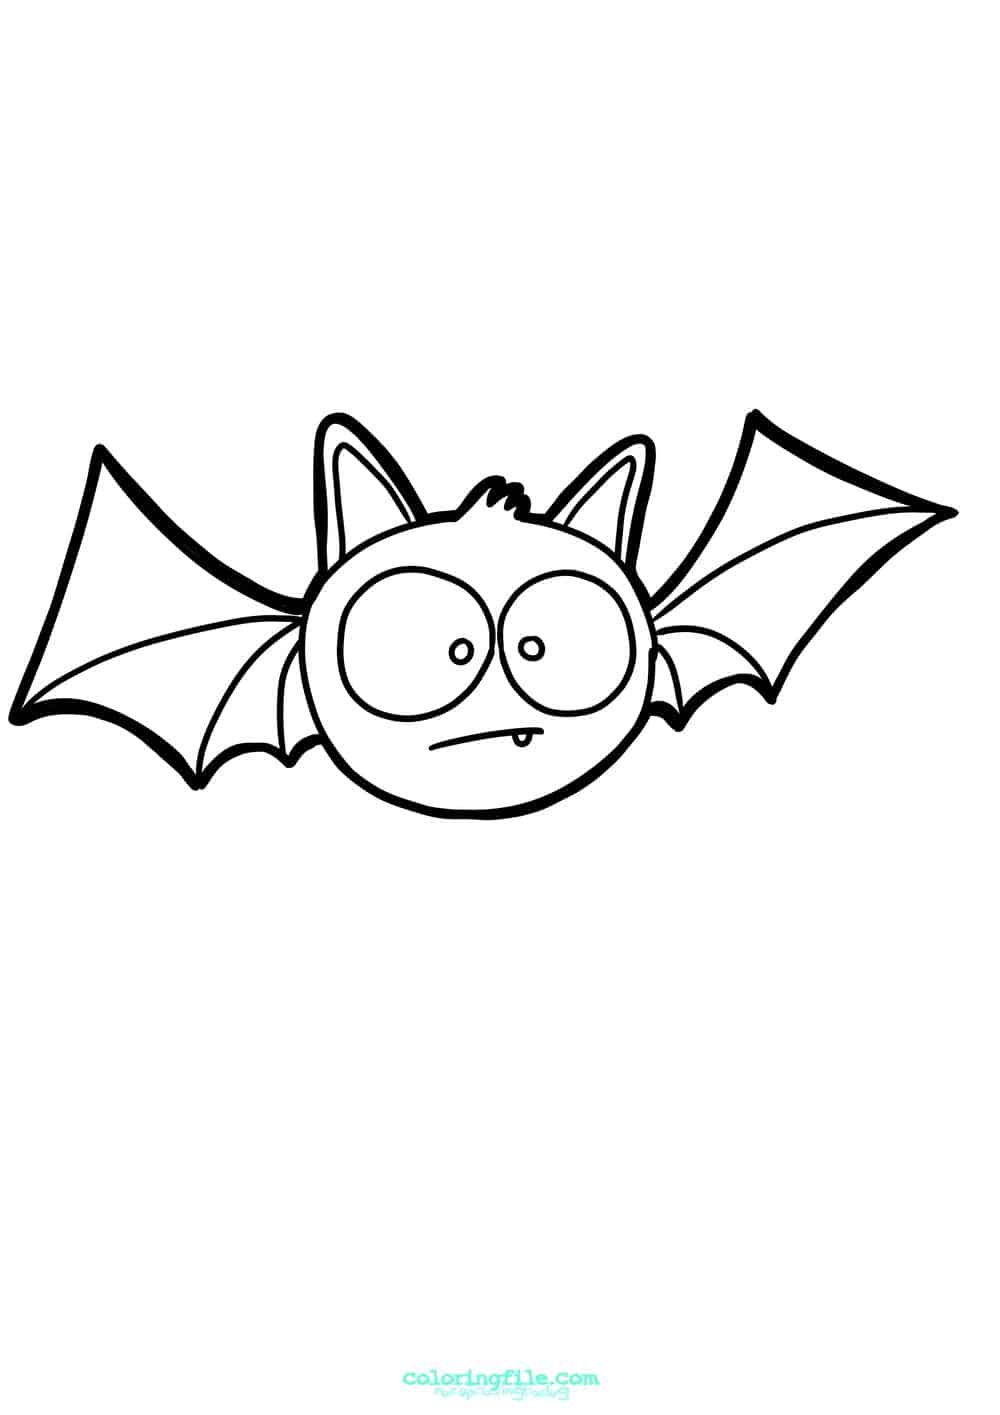 Halloween cute bat coloring pages